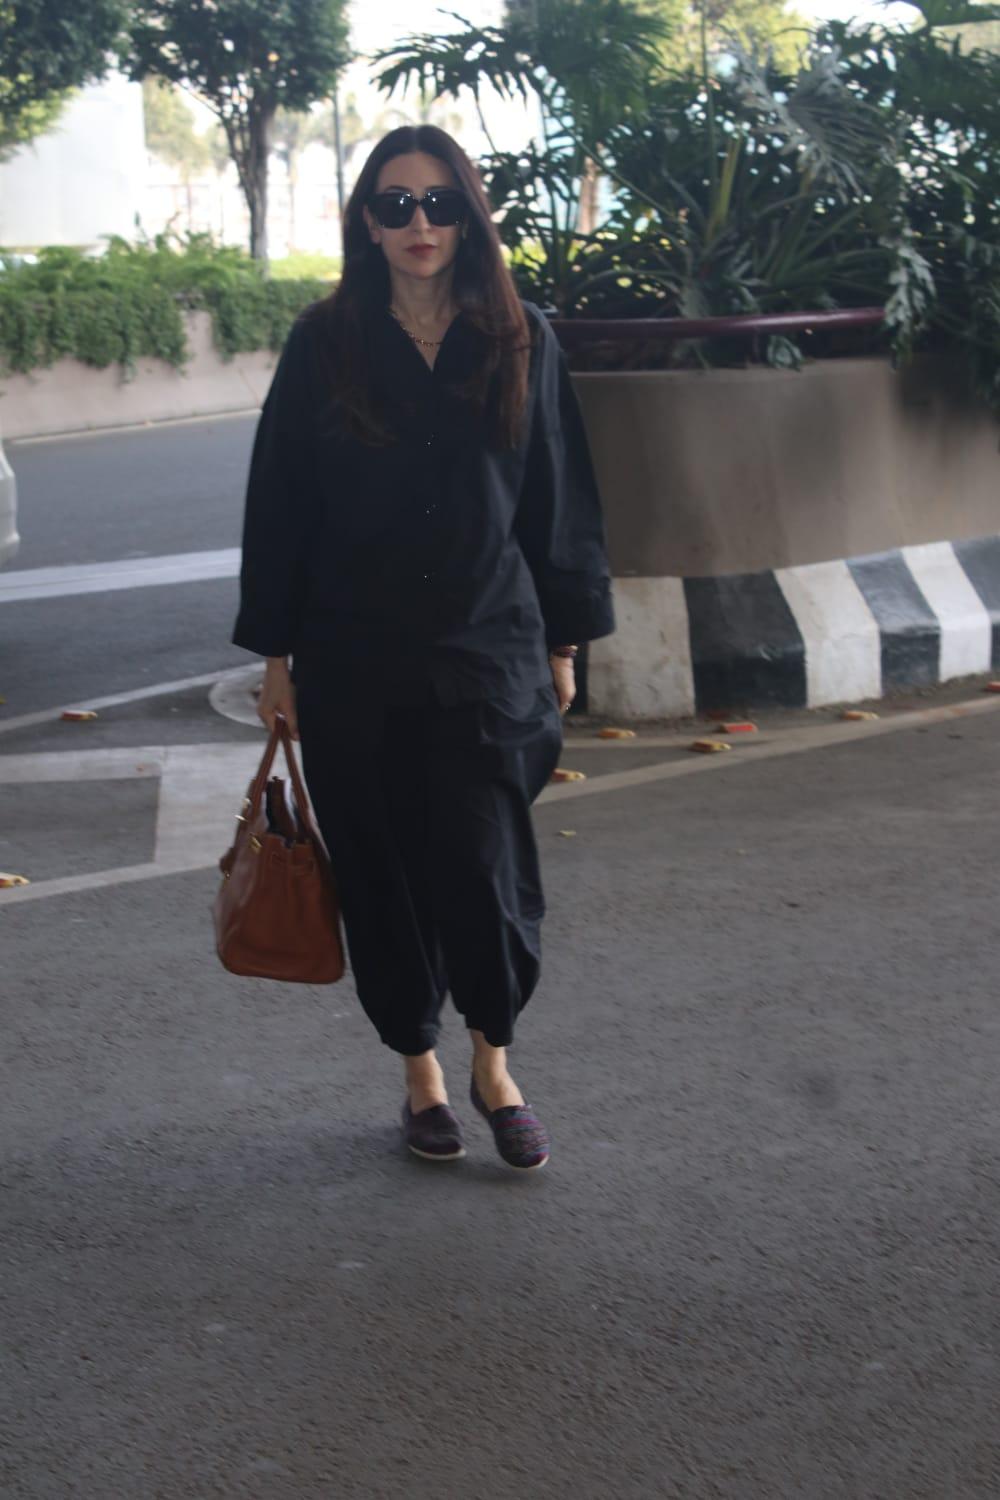 Karisma Kapoor was pictured arriving at the airport